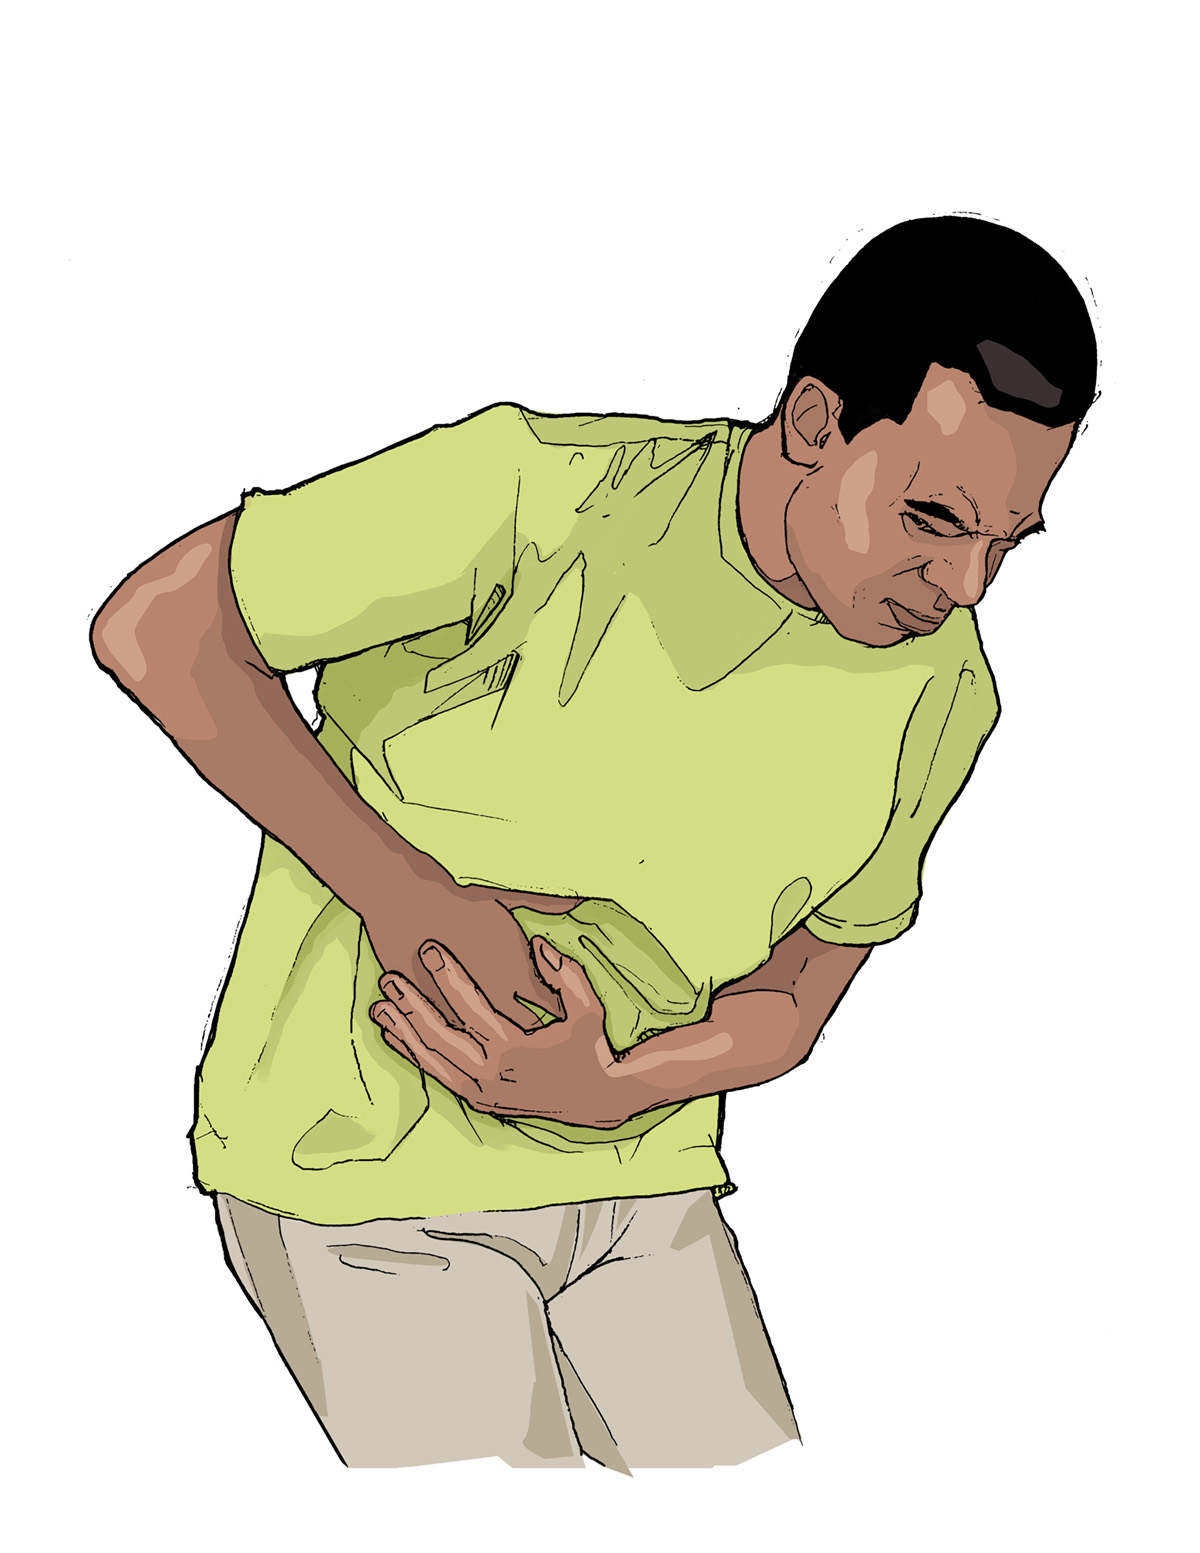 Lower right side abdominal pain | Gastrointestinal Disorders articles